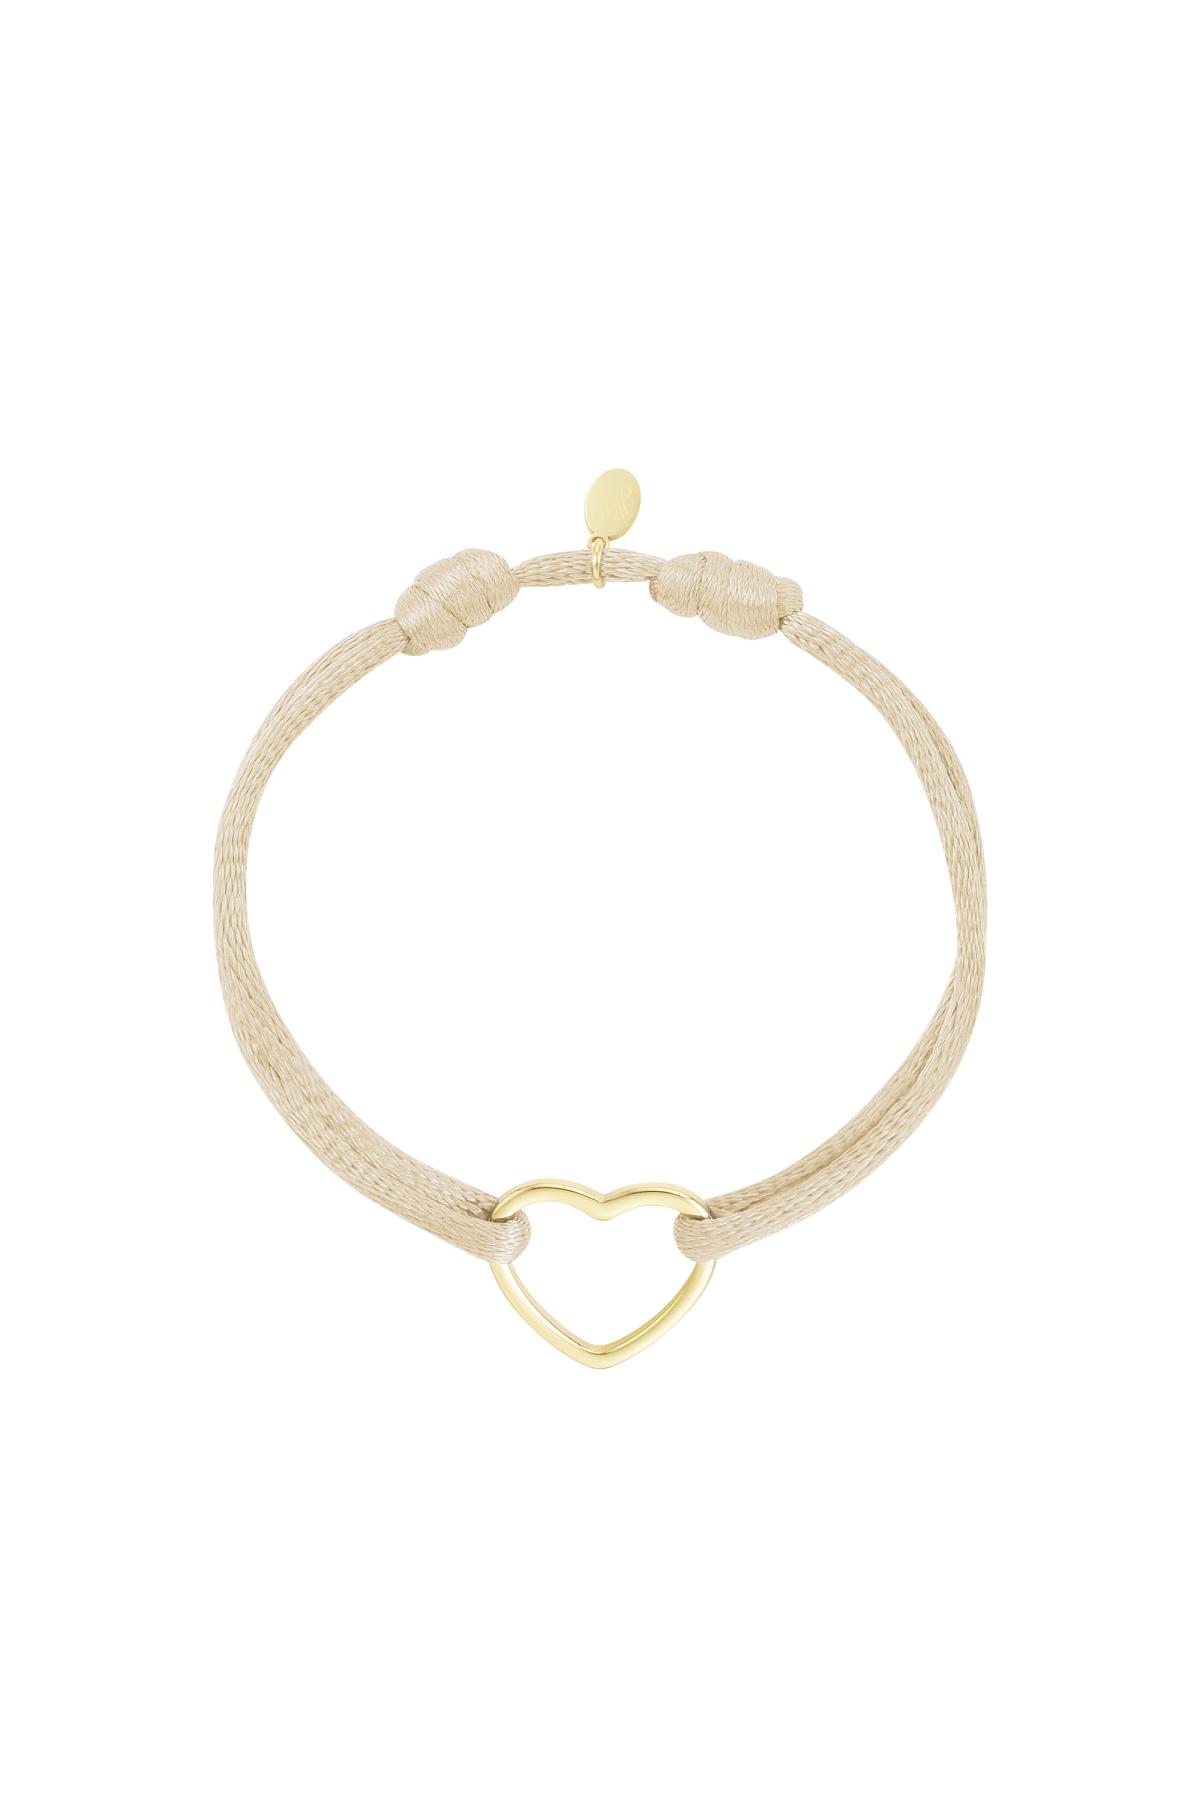 Bracciale in tessuto cuore Champagne Stainless Steel h5 